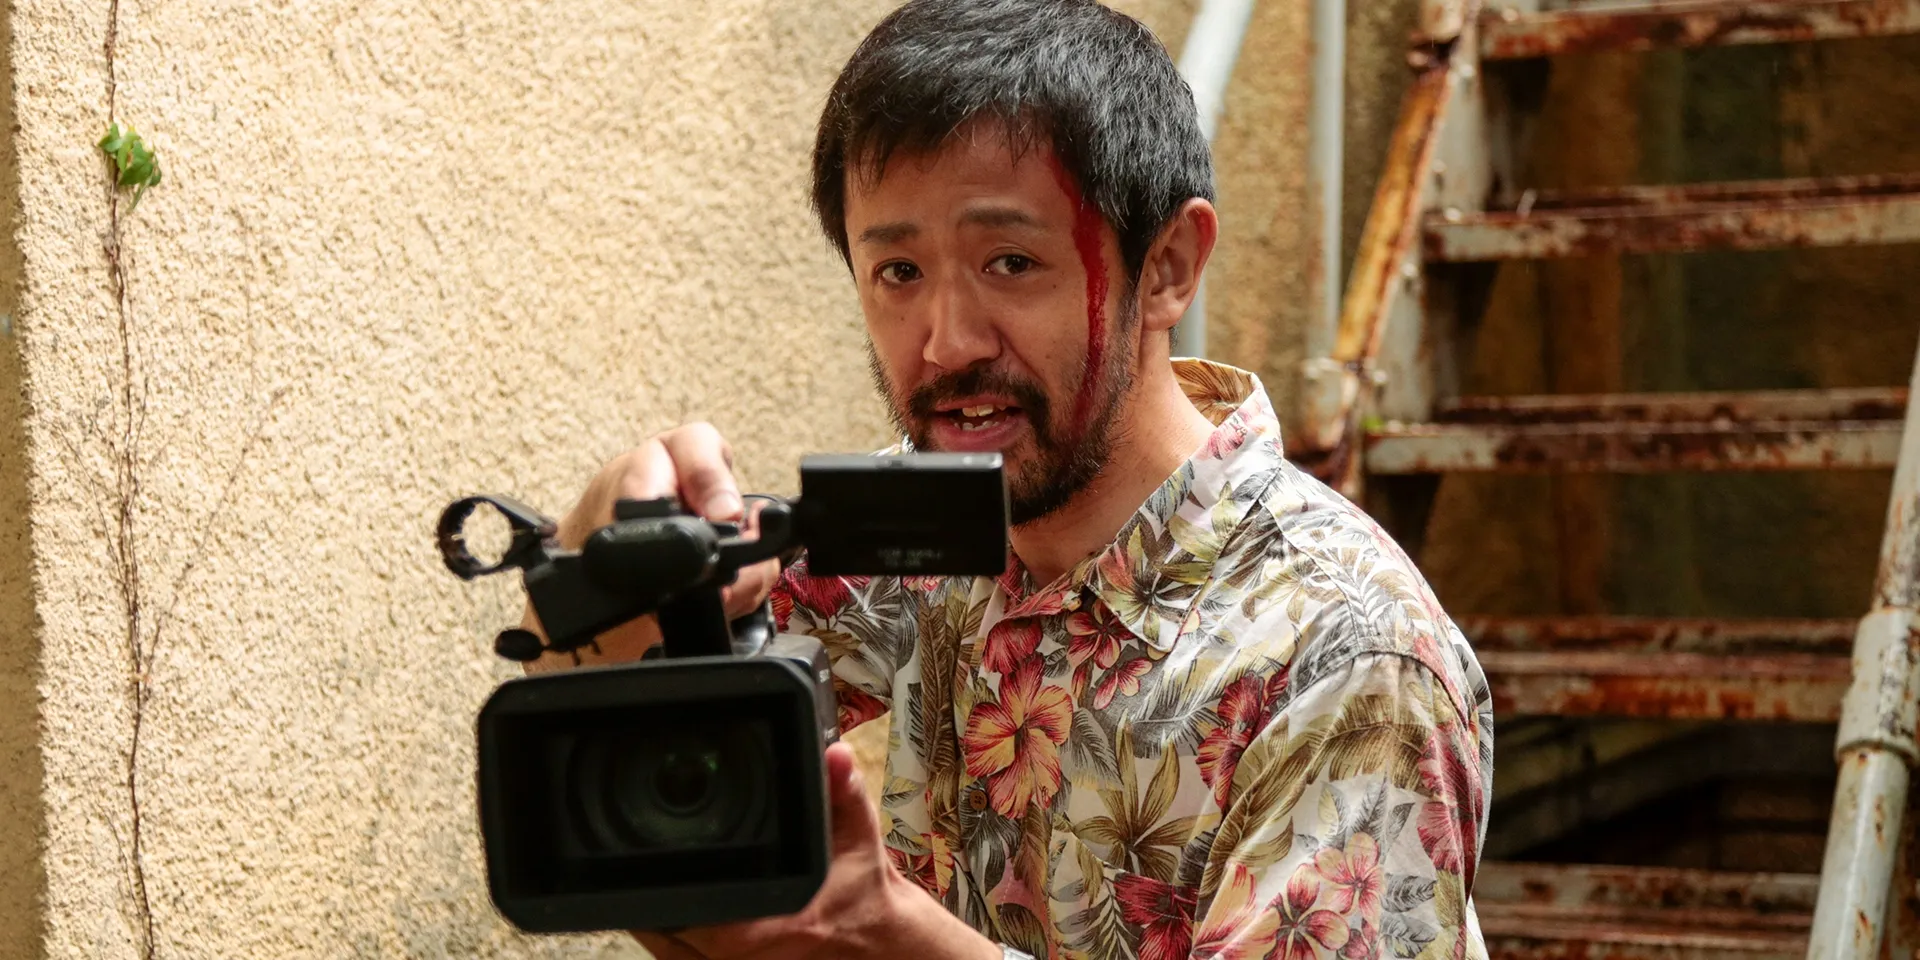 The director films while standing next to a stairway in a scene from ‘One Cut of the Dead’